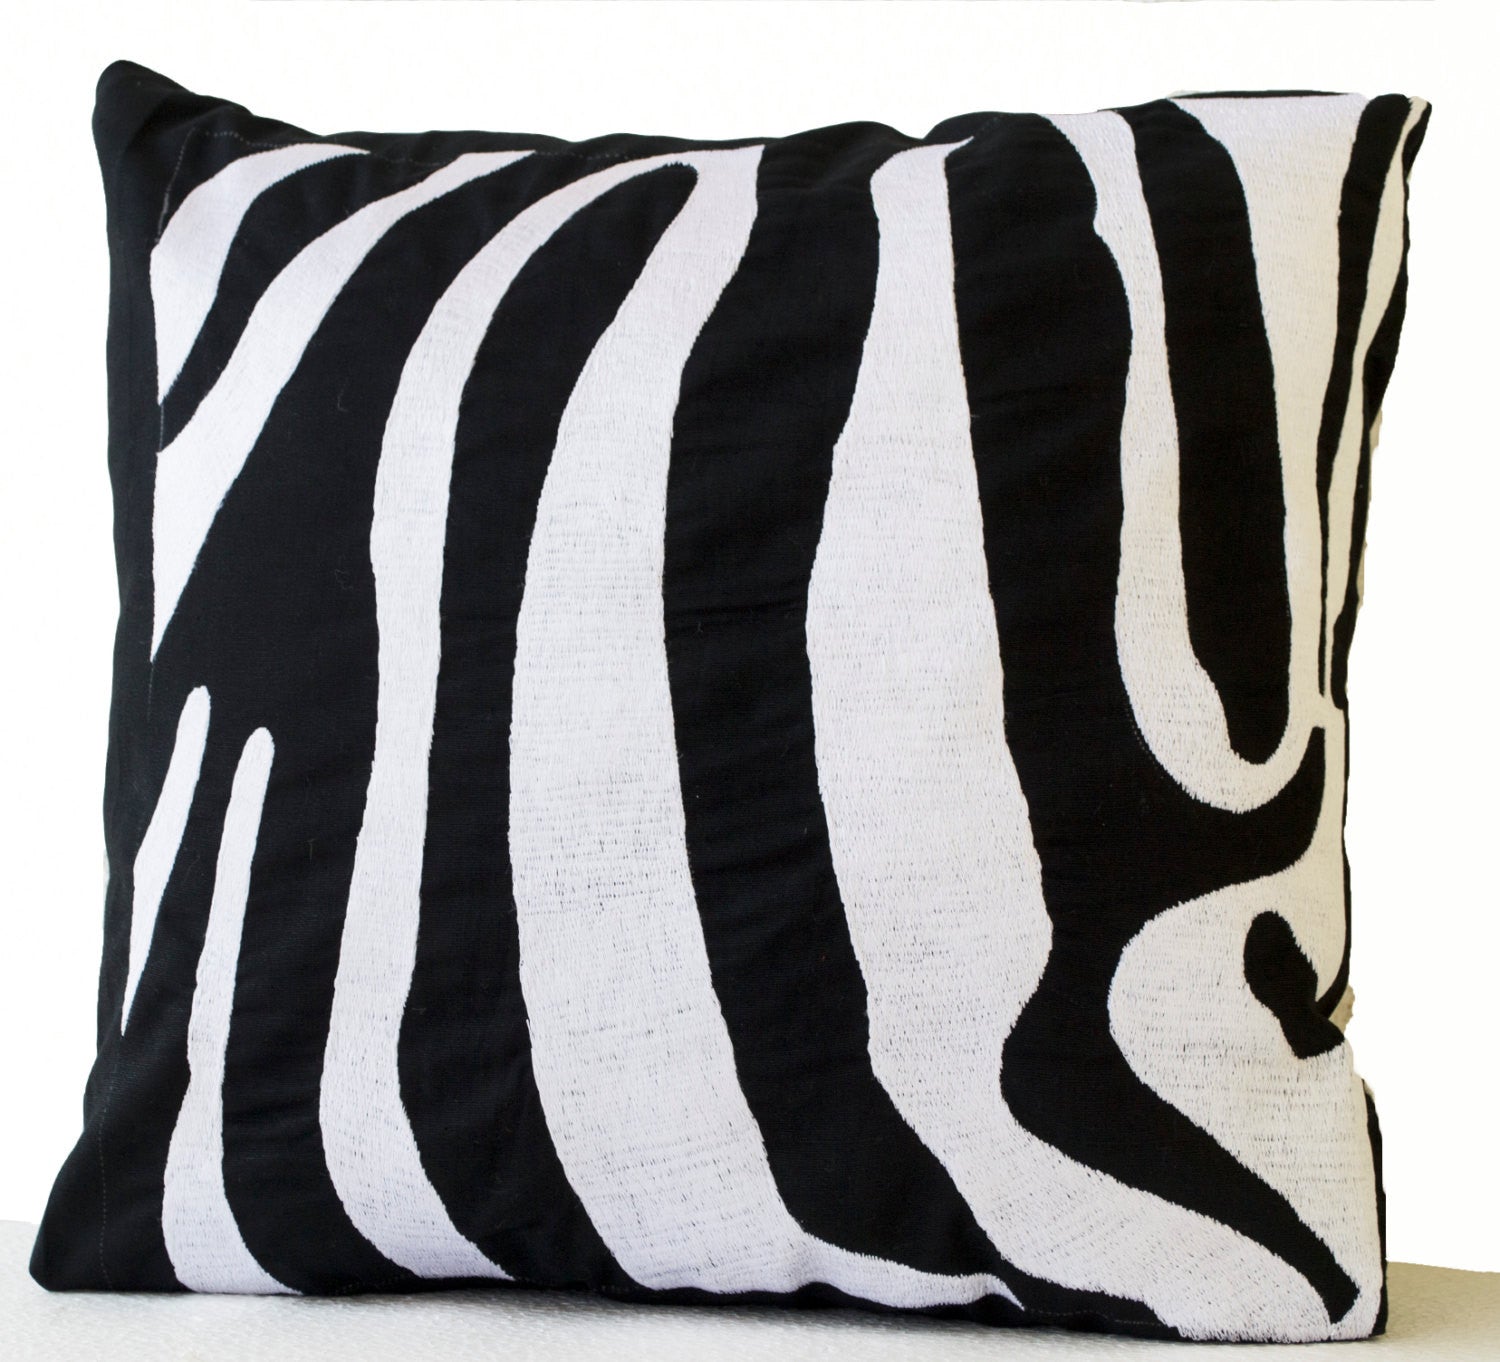 Handmade zebra striped accent pillow with embroidery